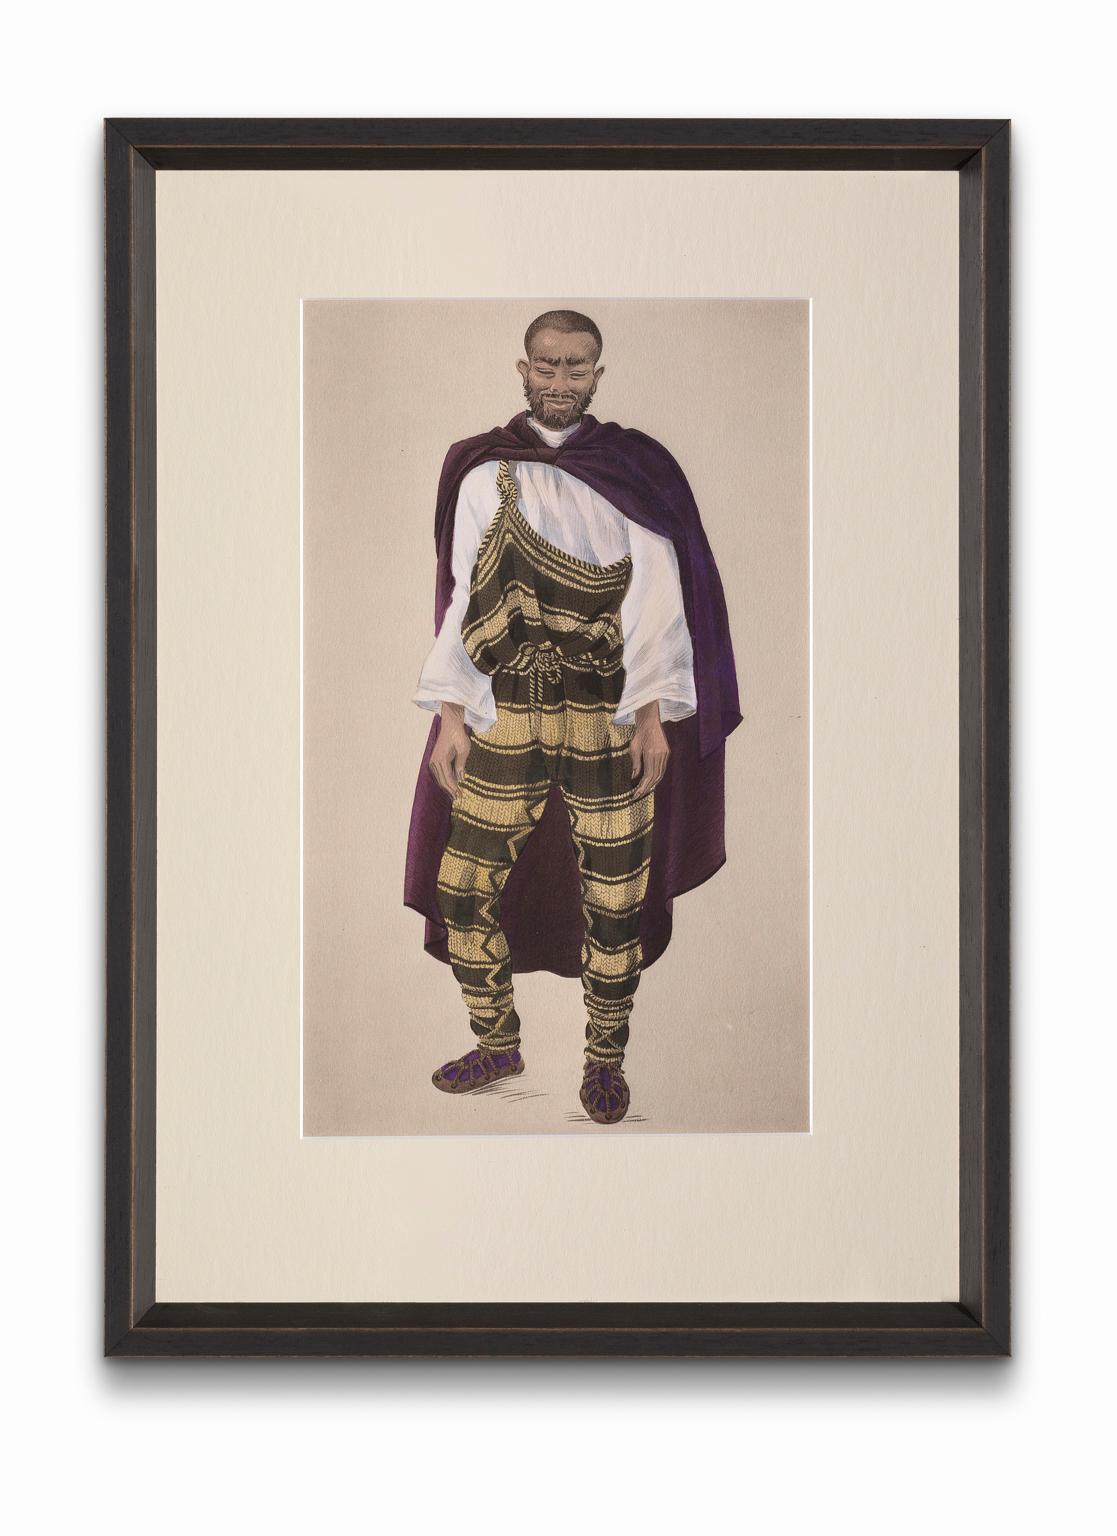 Jean Besancenot Portrait Print - "Man of The Ouanergui Carrying the Tabbane" from "Costumes of Morocco"